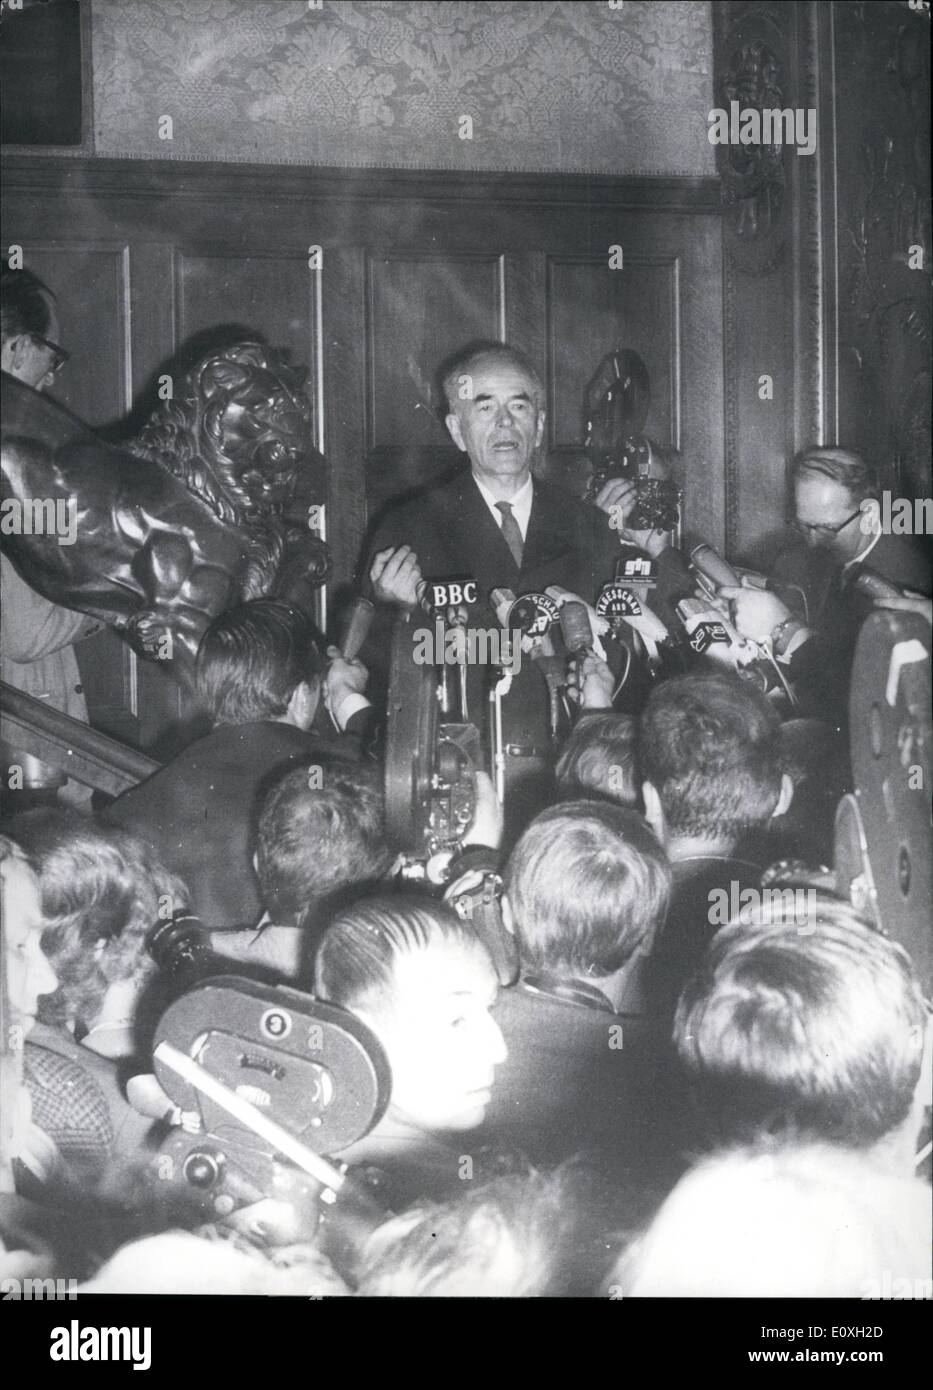 Oct. 10, 1966 - Speer and Schirach leaved the prison last night: After 20 years in the Spandau prison Albert Speer and Baldur von Schirach could leave last night at 24 hours. Immediately after it Albert Speer wents to the Berlin Hotel Gehrhus. Photo shows Albert Speer in the Berlin Hotel. Stock Photo